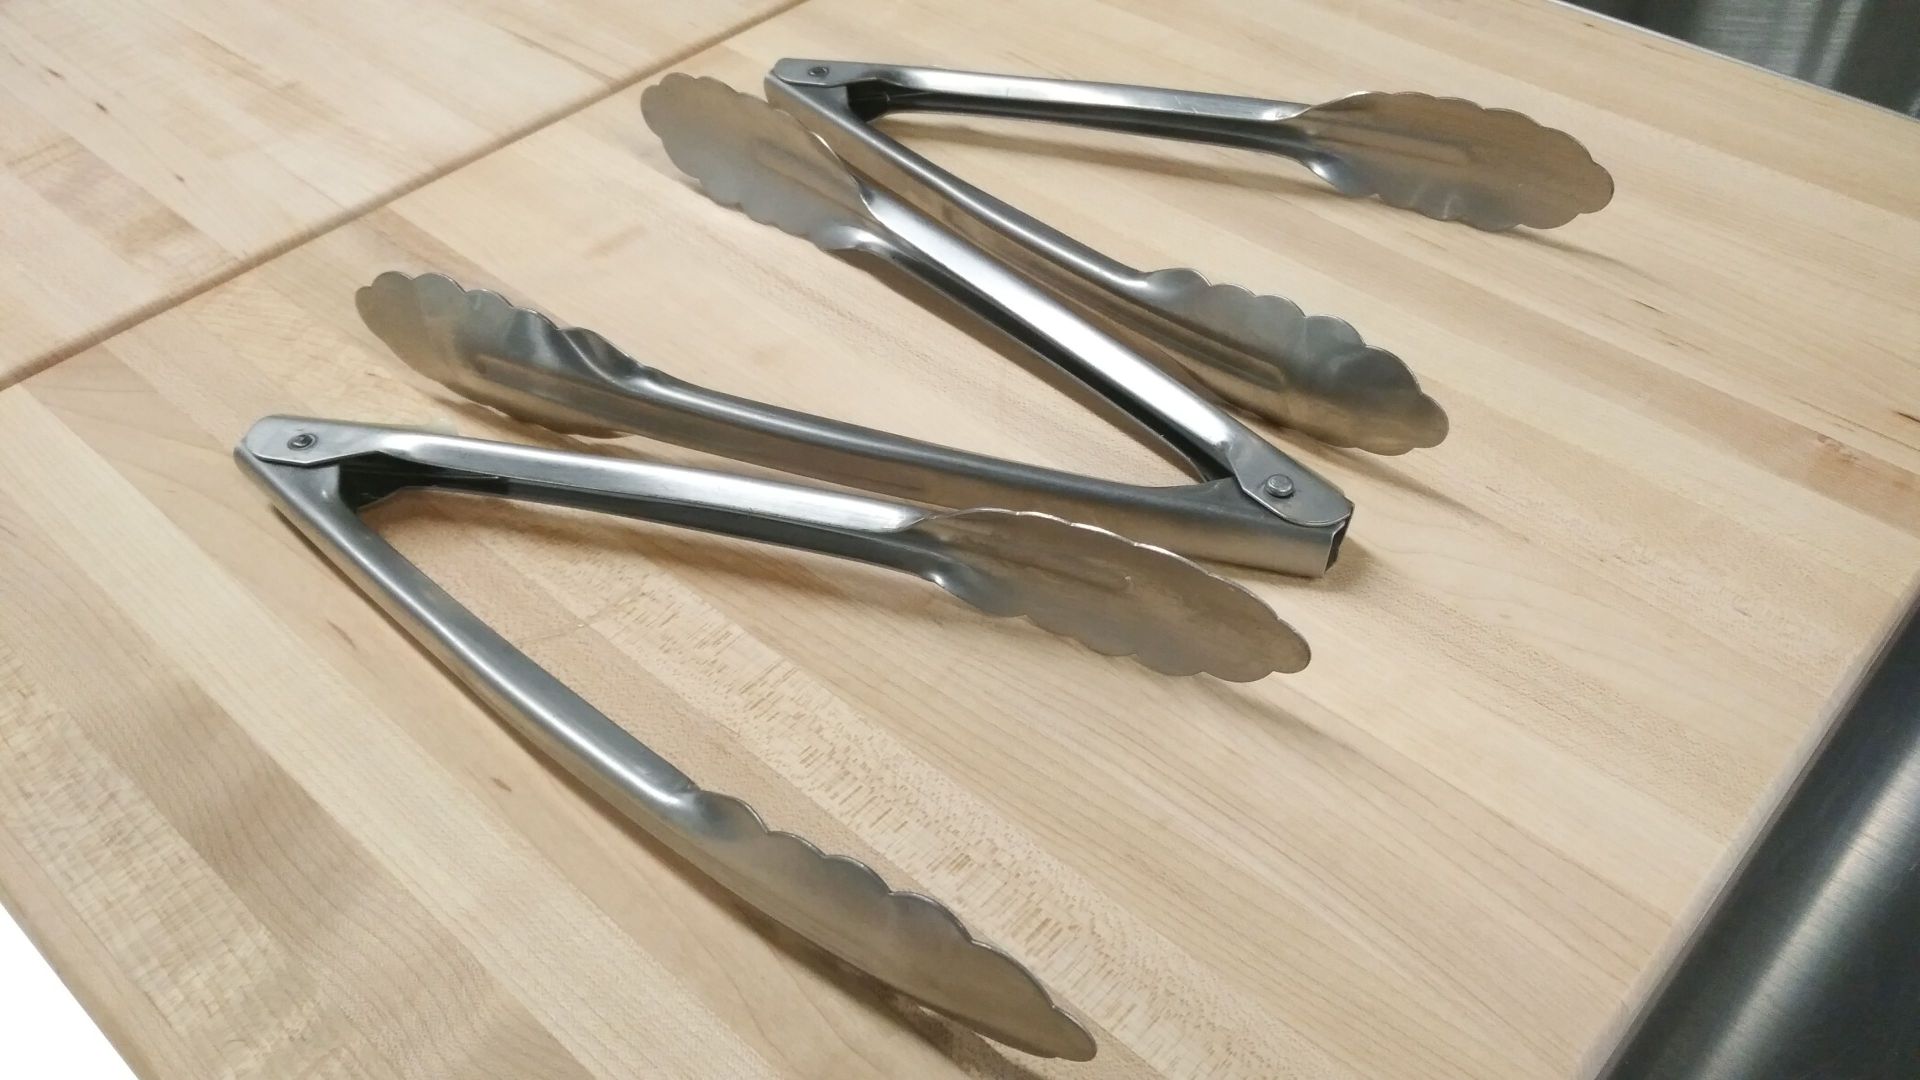 9" Stainless Extra Heavy Duty Tongs - Lot of 3